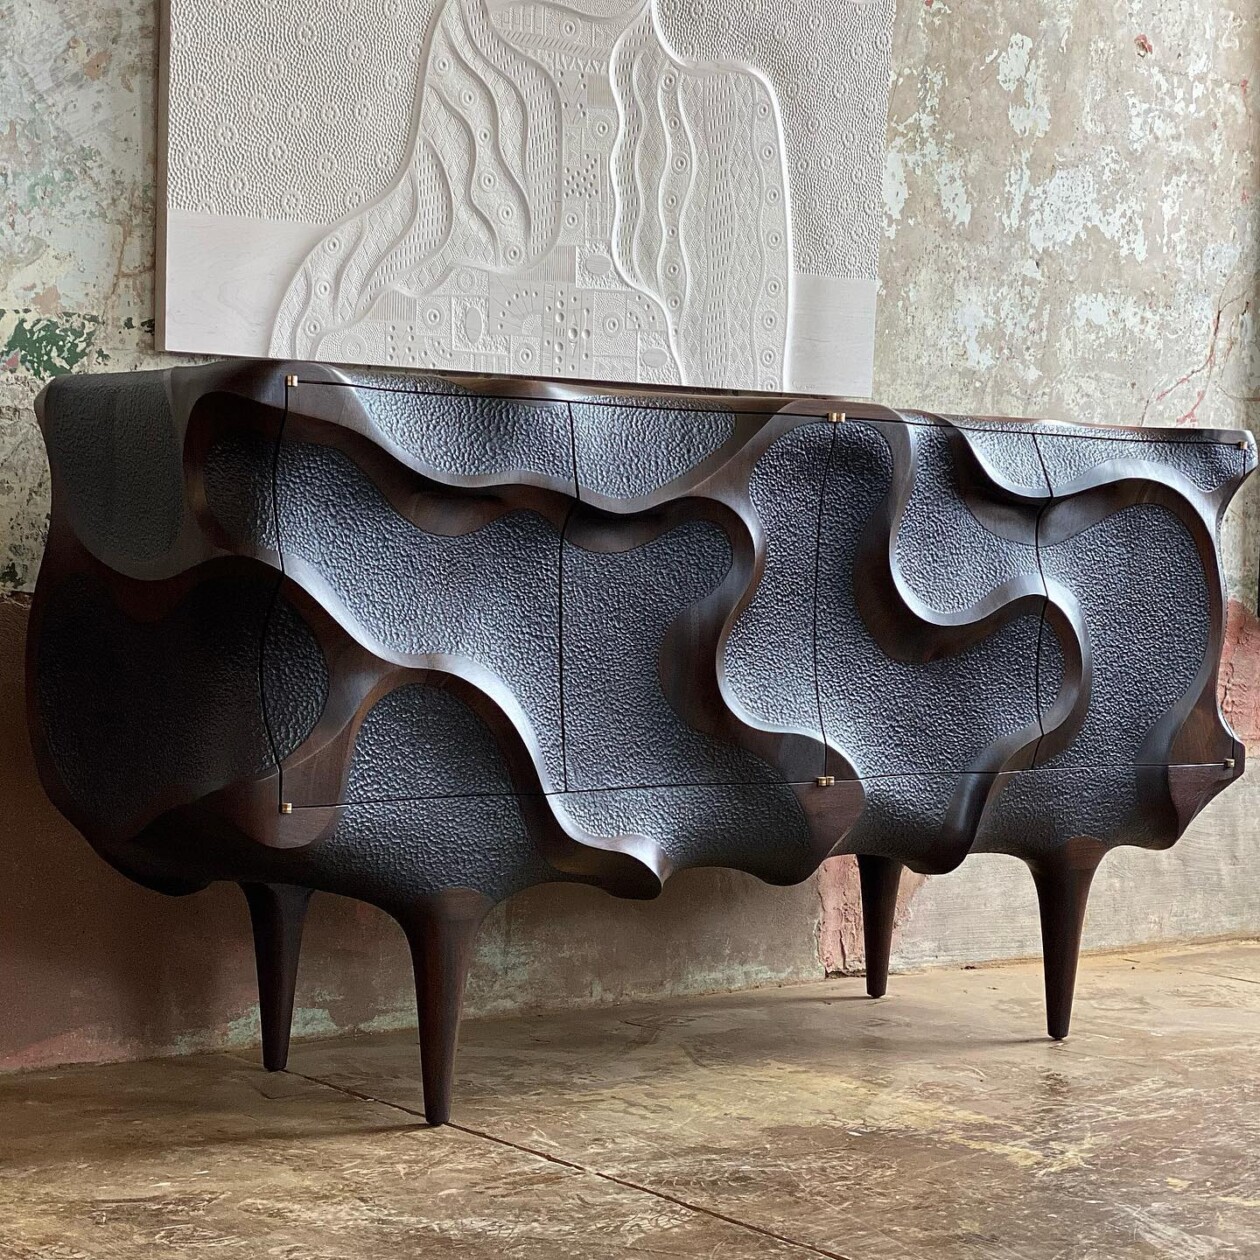 Intricately Engraved And Textured Organic Shaped Furniture By Caleb Woodard (9)